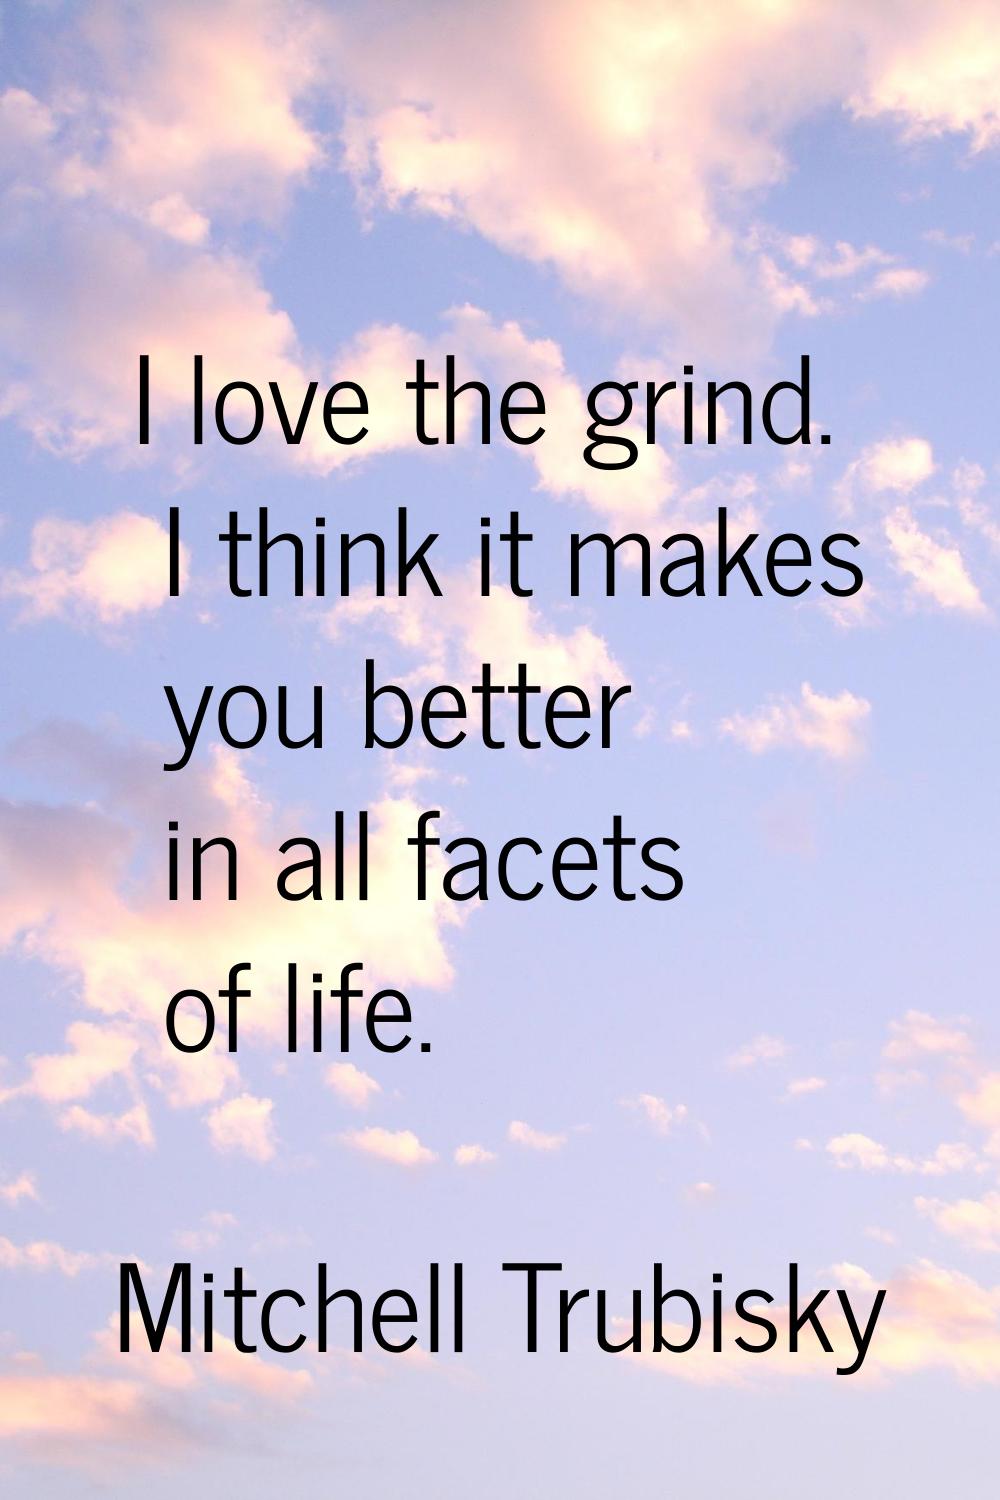 I love the grind. I think it makes you better in all facets of life.